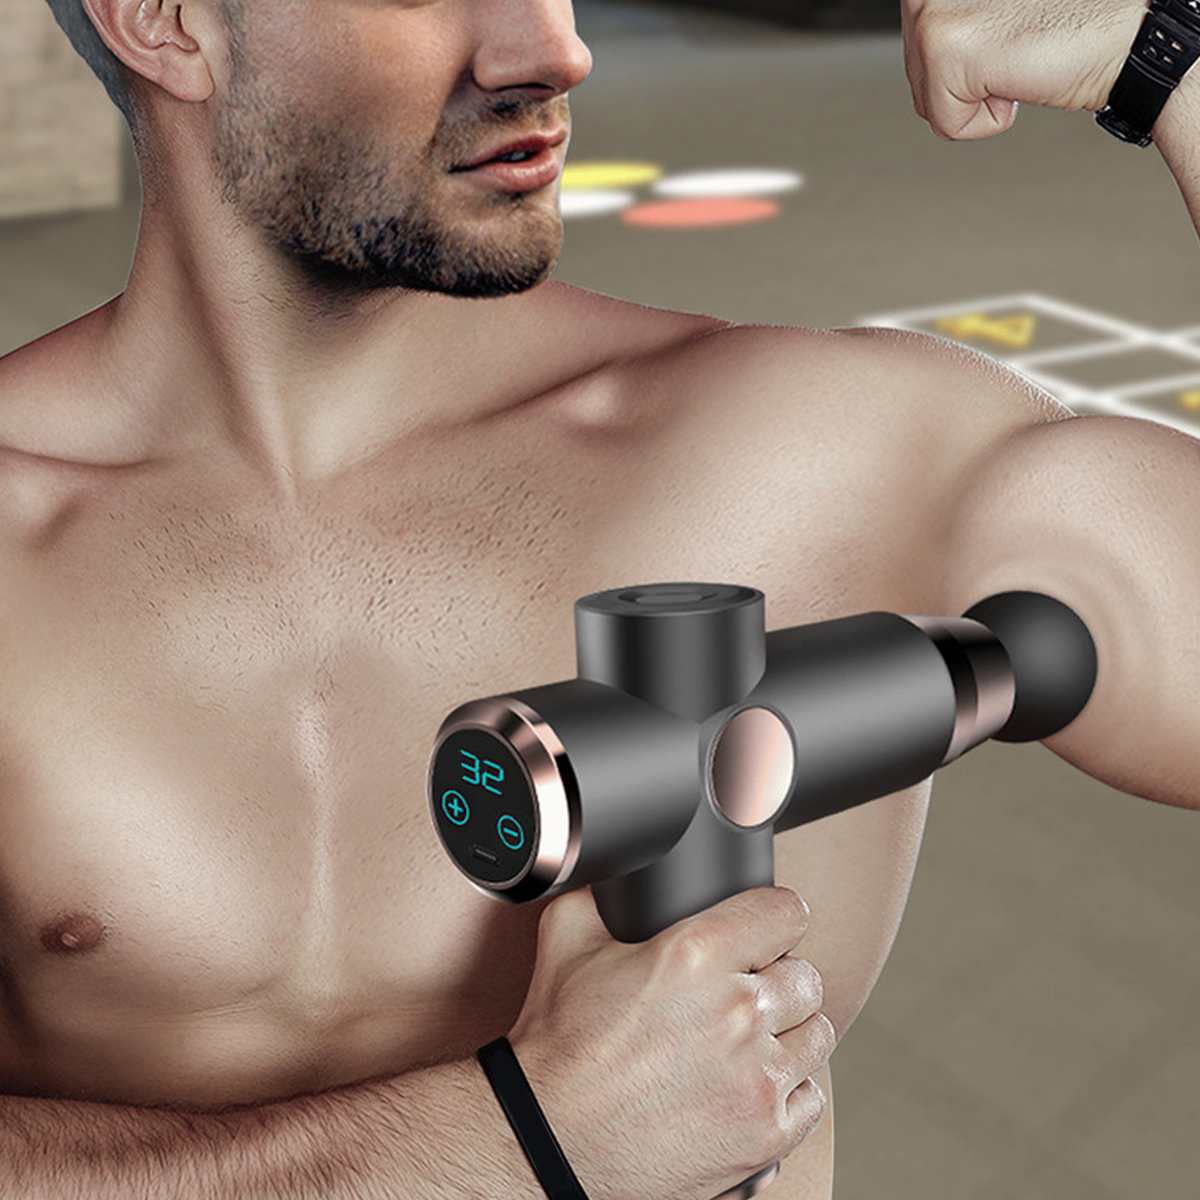 NEW Muscle Massager 32 gears for high-speed muscle therapy